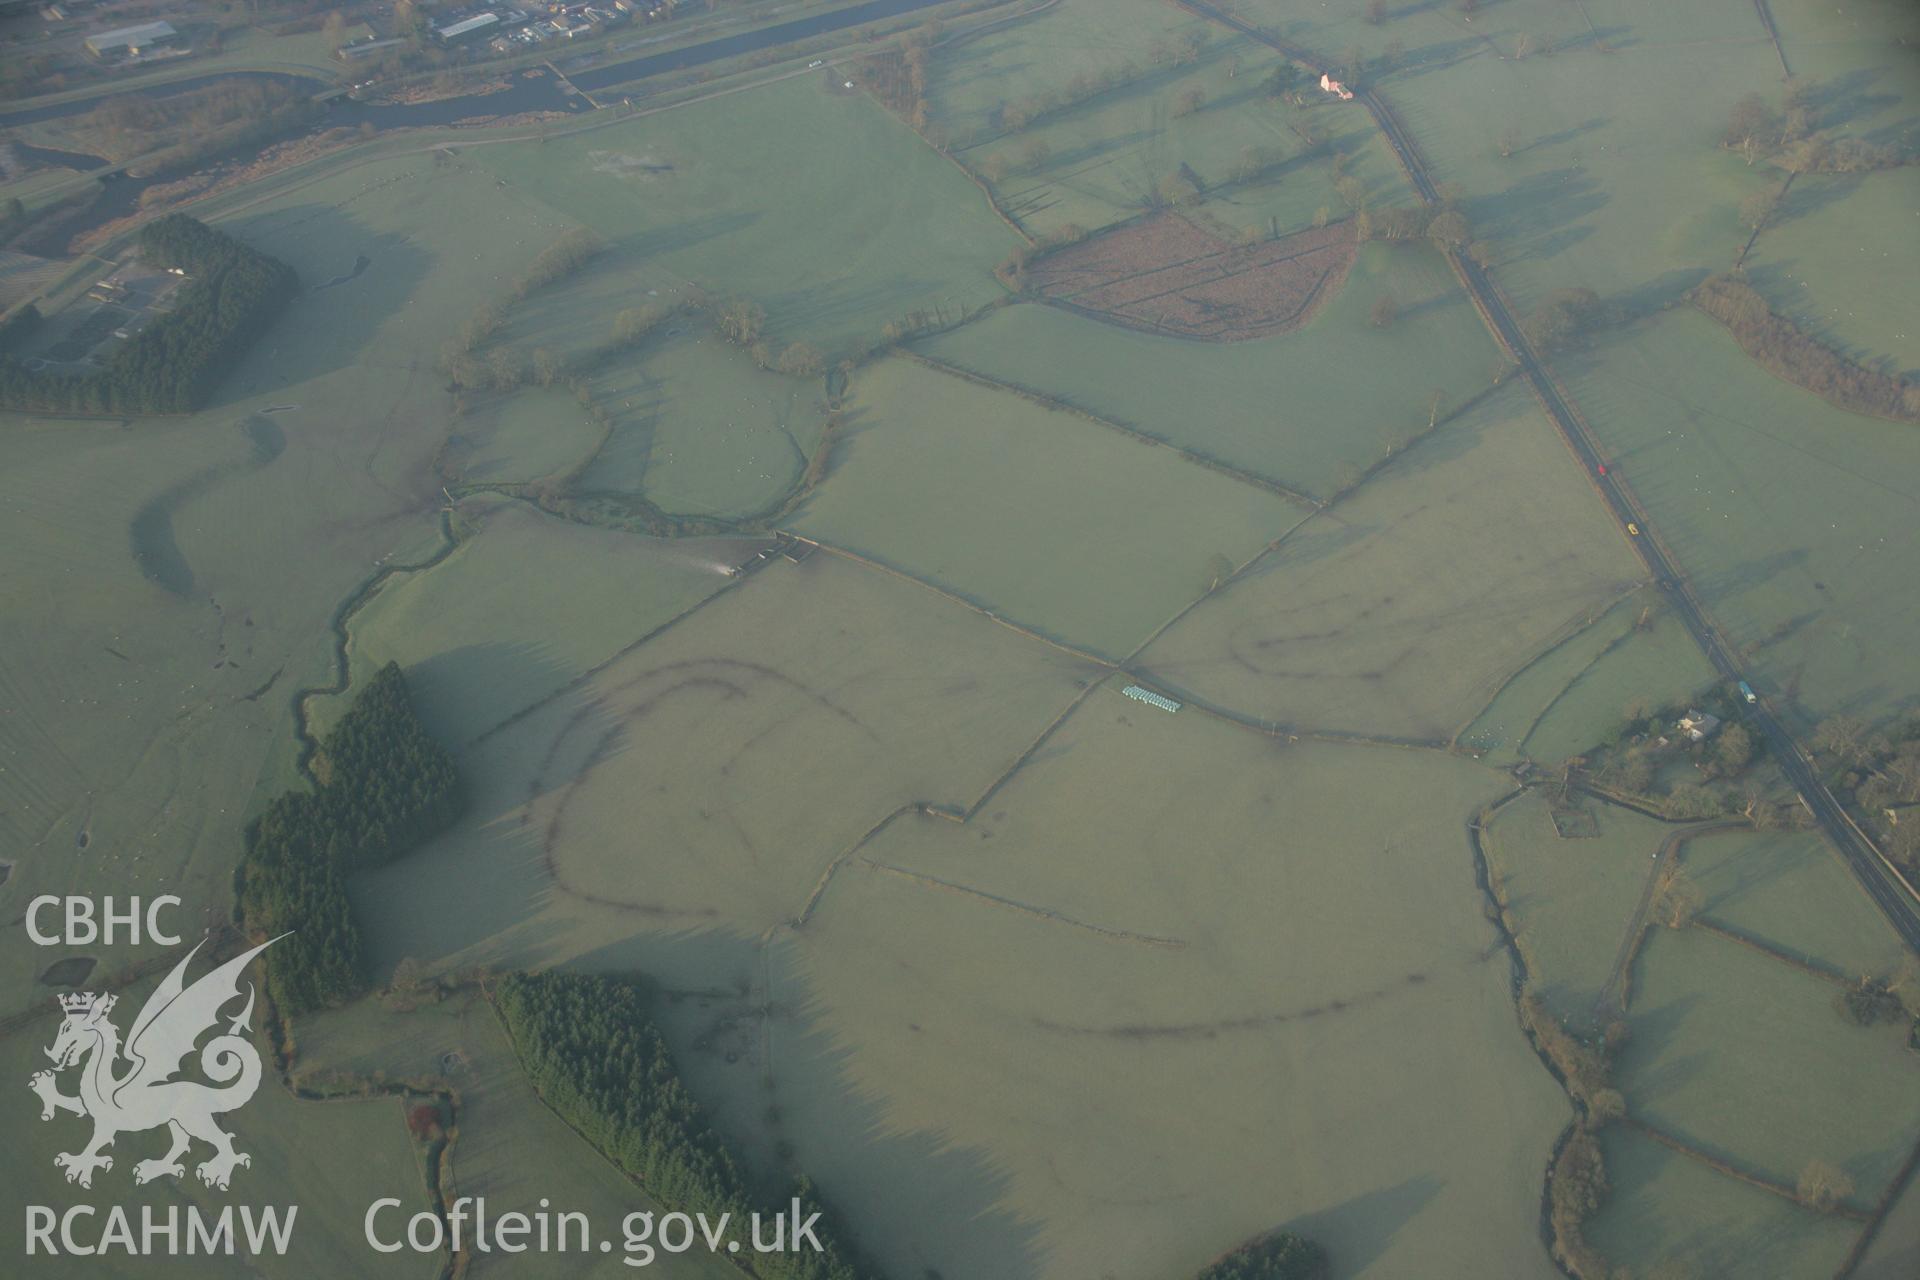 RCAHMW colour oblique aerial photograph of Llanfor Roman Military Complex including fort and camps. Taken on 25 January 2007 by Toby Driver